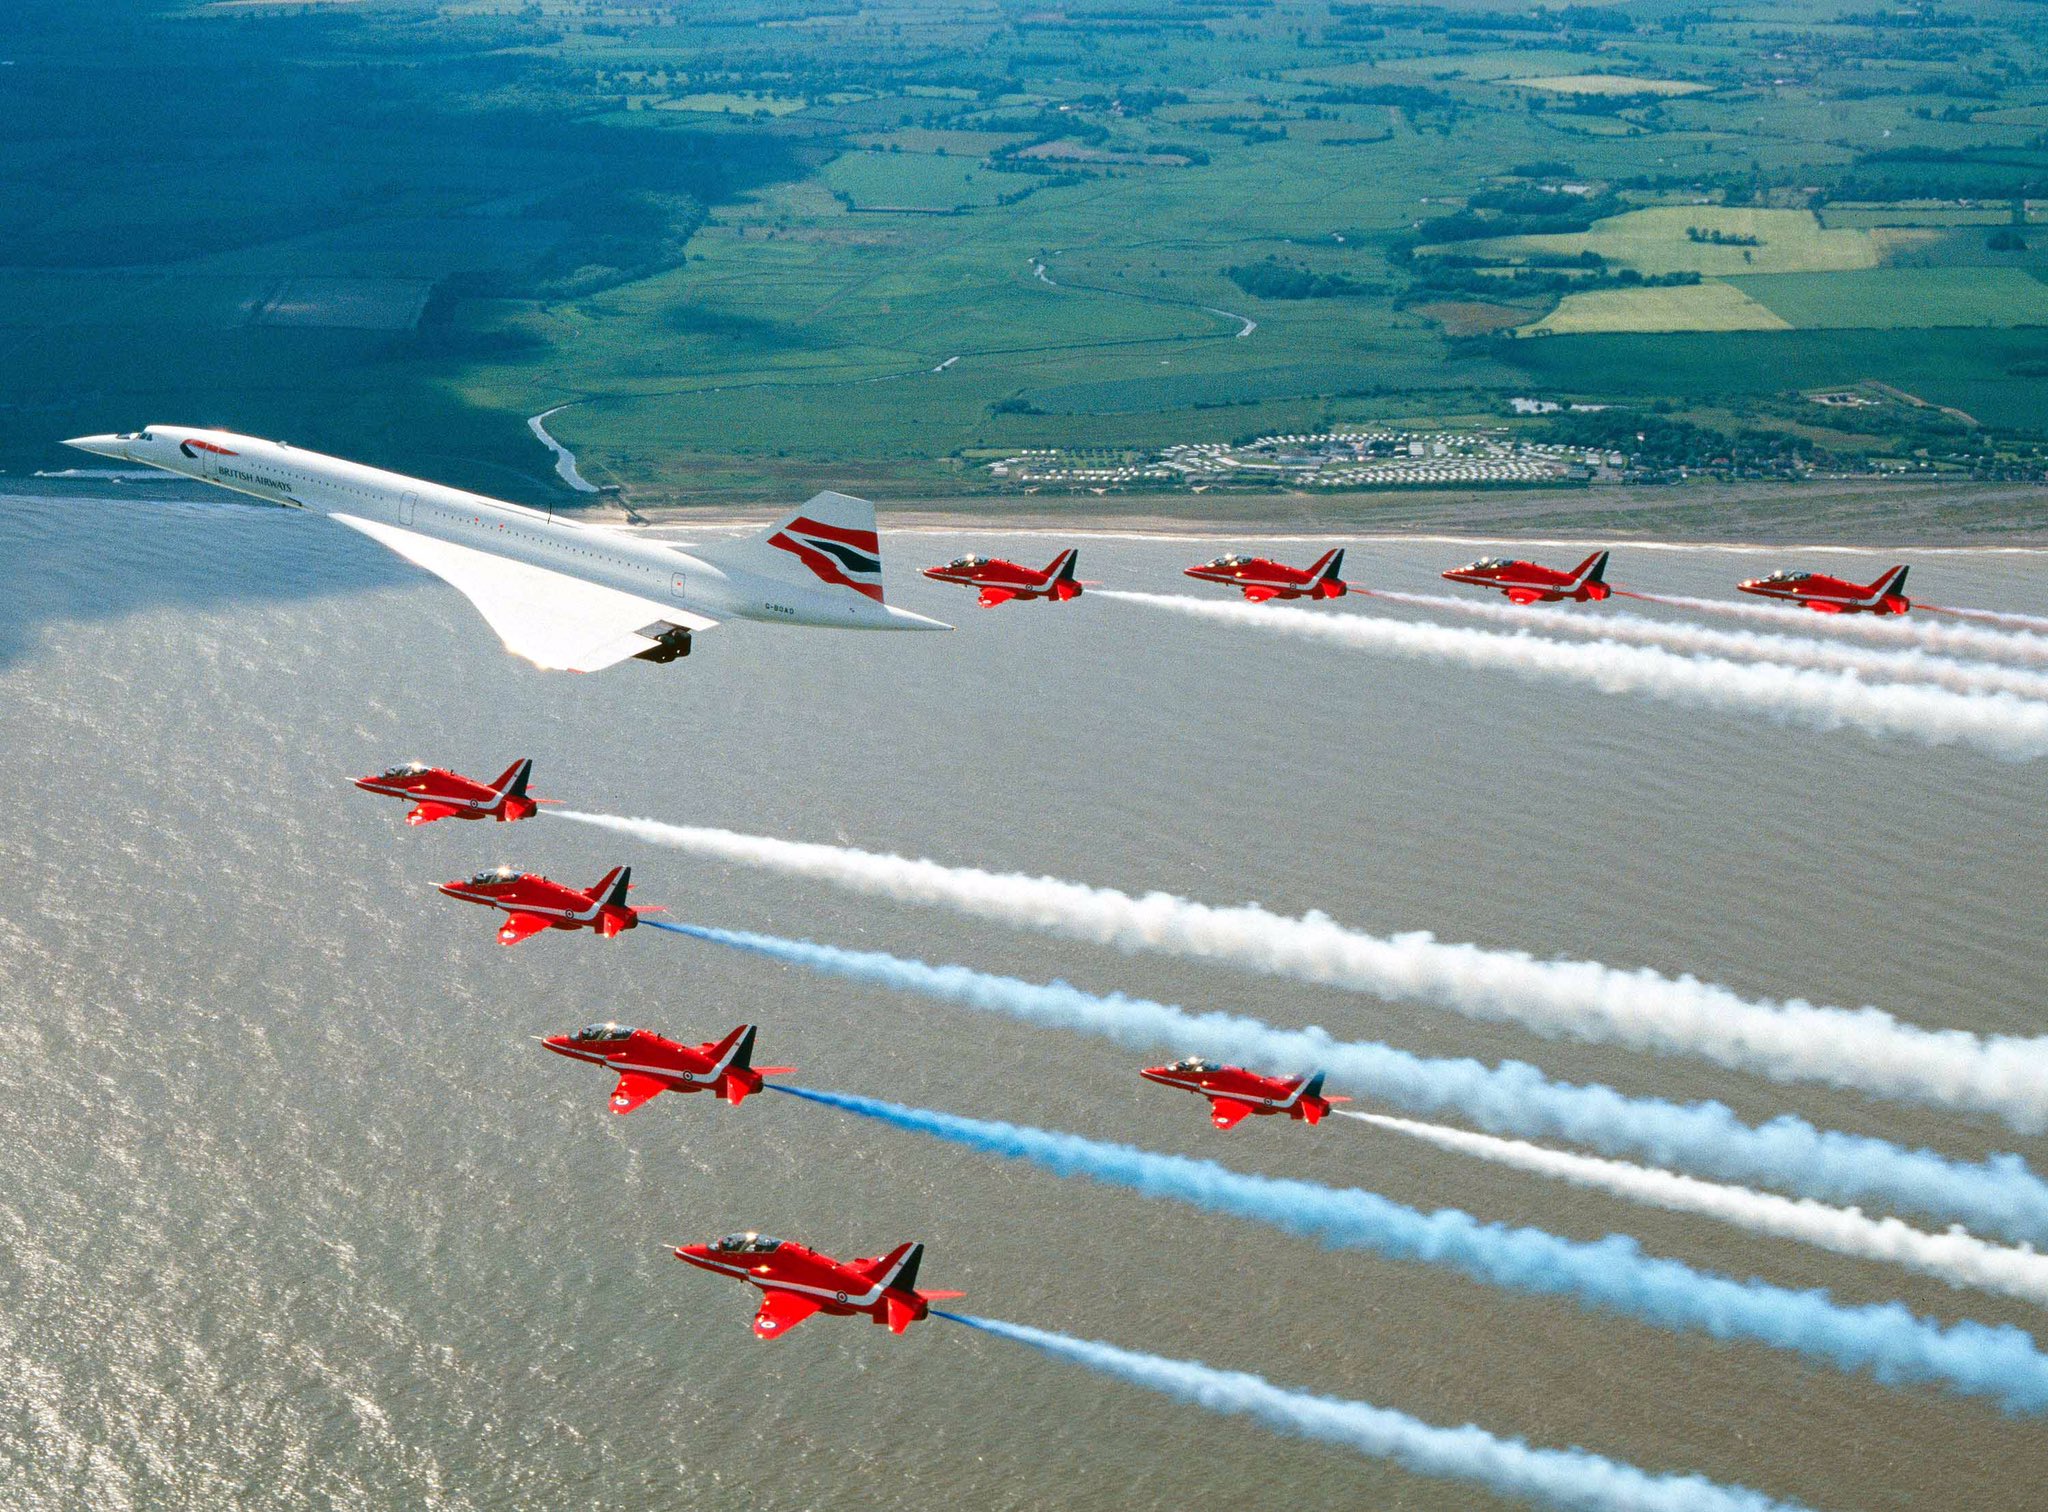 Oxide kassette Slået lastbil Red Arrows on Twitter: "Power and precision: Here's a glorious picture from  our archives to celebrate the 50th anniversary today of Concorde's maiden  flight. #Concorde #Concorde50 #redarrows https://t.co/FROcLXAU9N" / Twitter